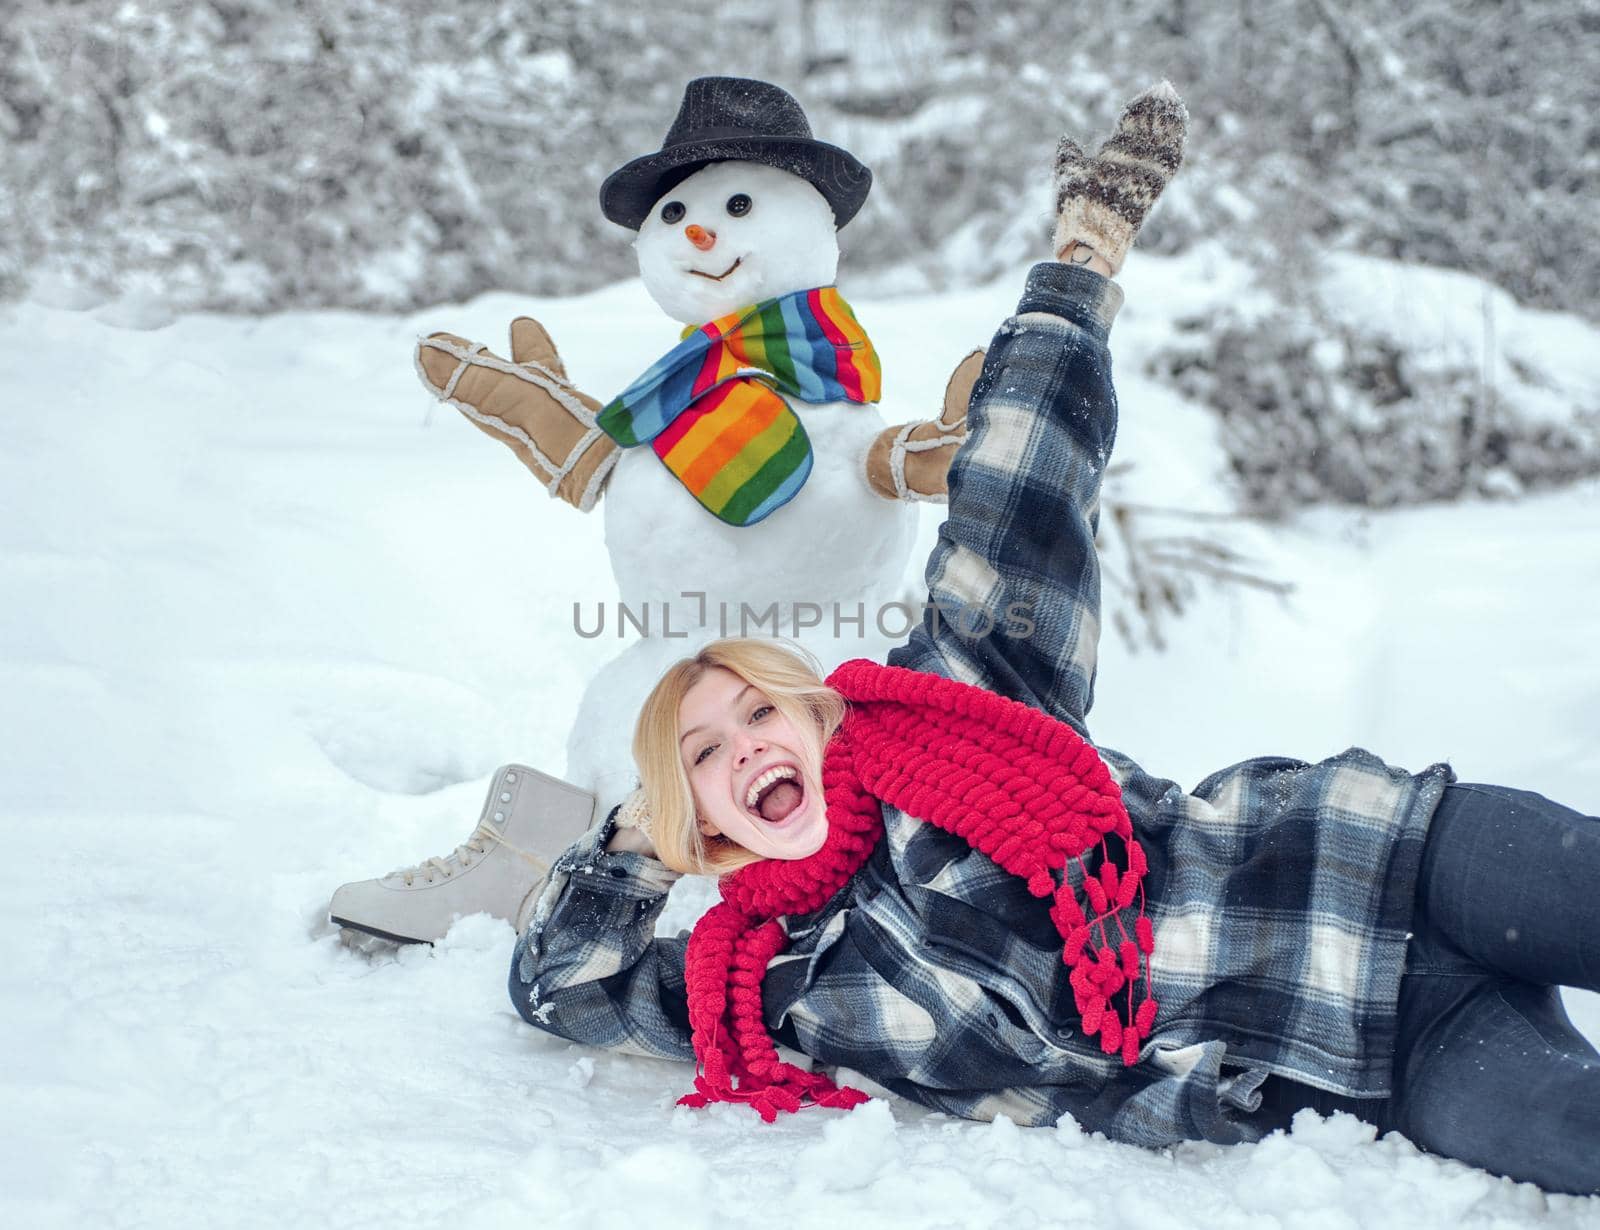 Winter woman. Greeting snowman. Snowman and funny female model standing in winter hat and scarf with red nose. Cute snowman at a snowy village. by Tverdokhlib